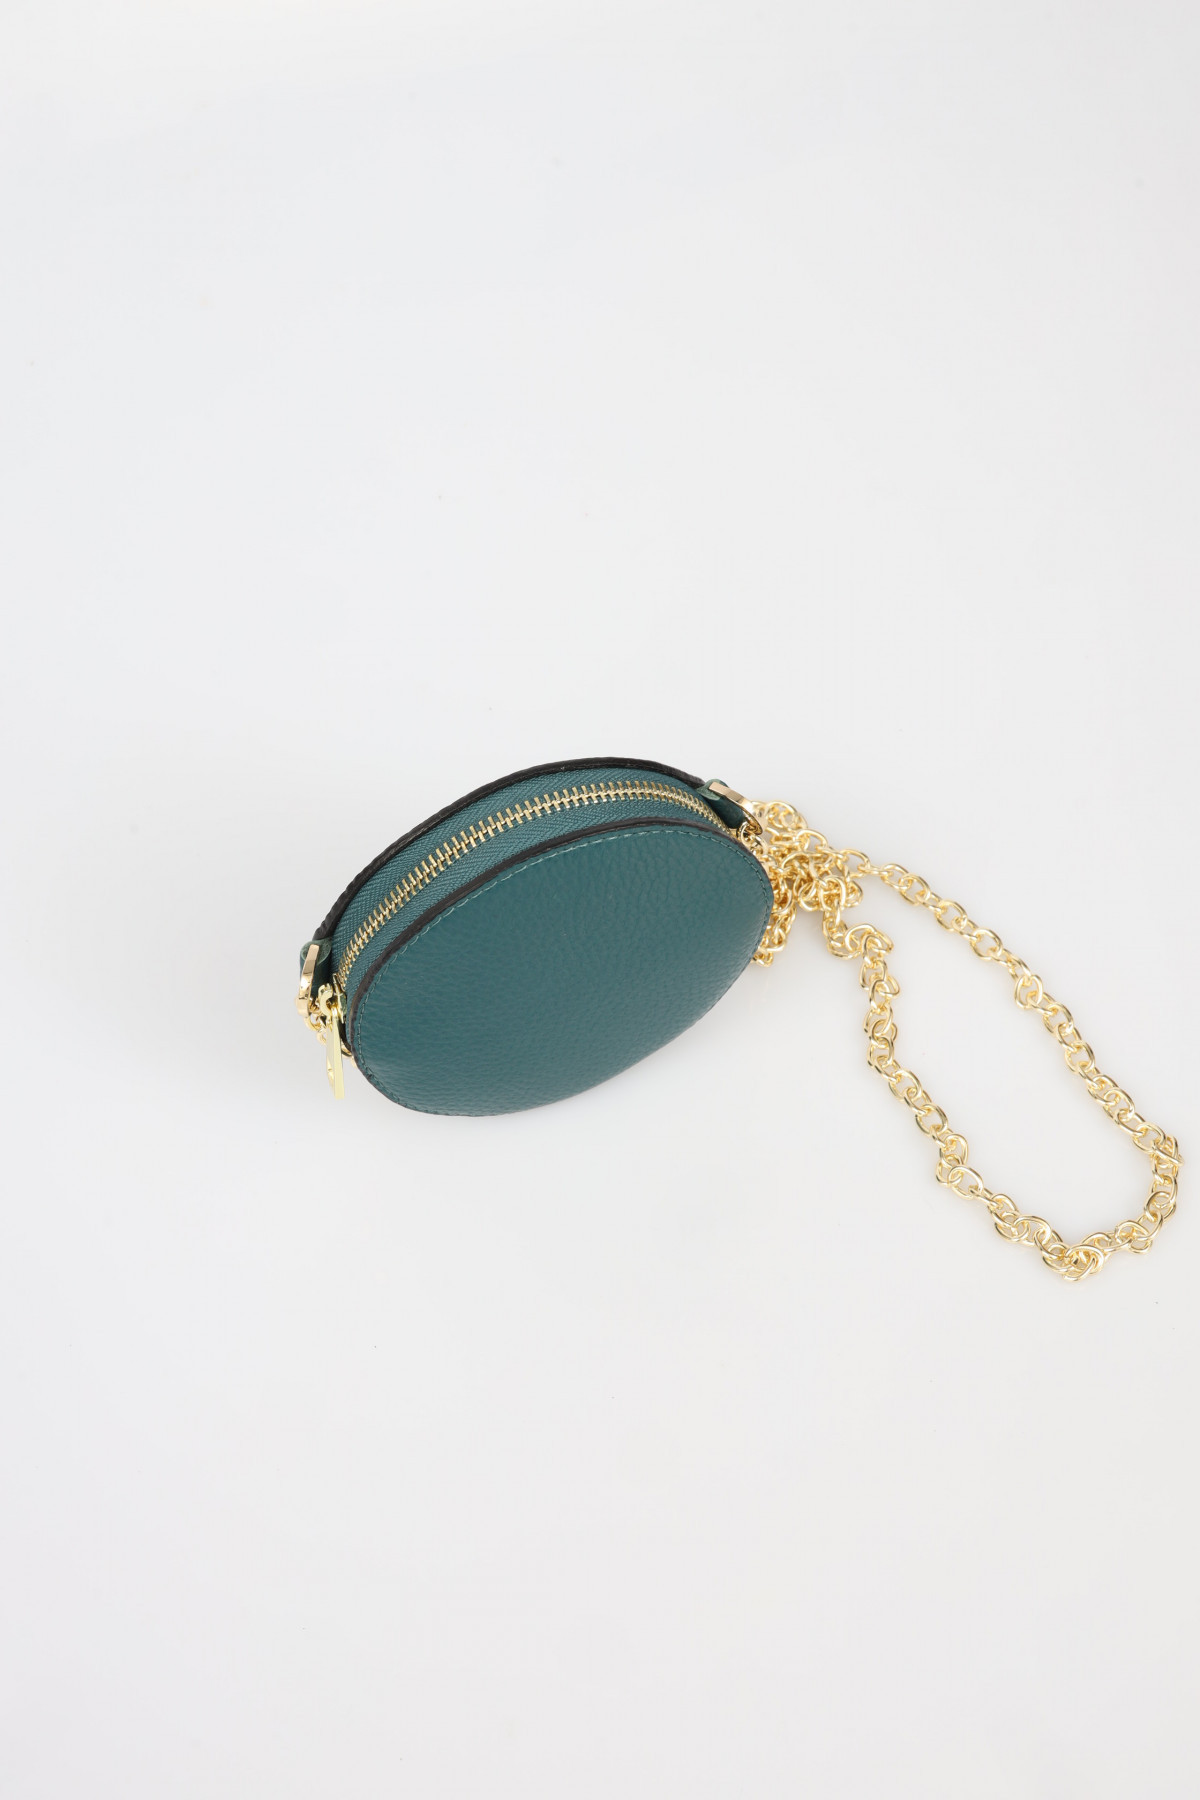 Circular Coin Purse in Genuine Leather with Golden Shoulder Strap